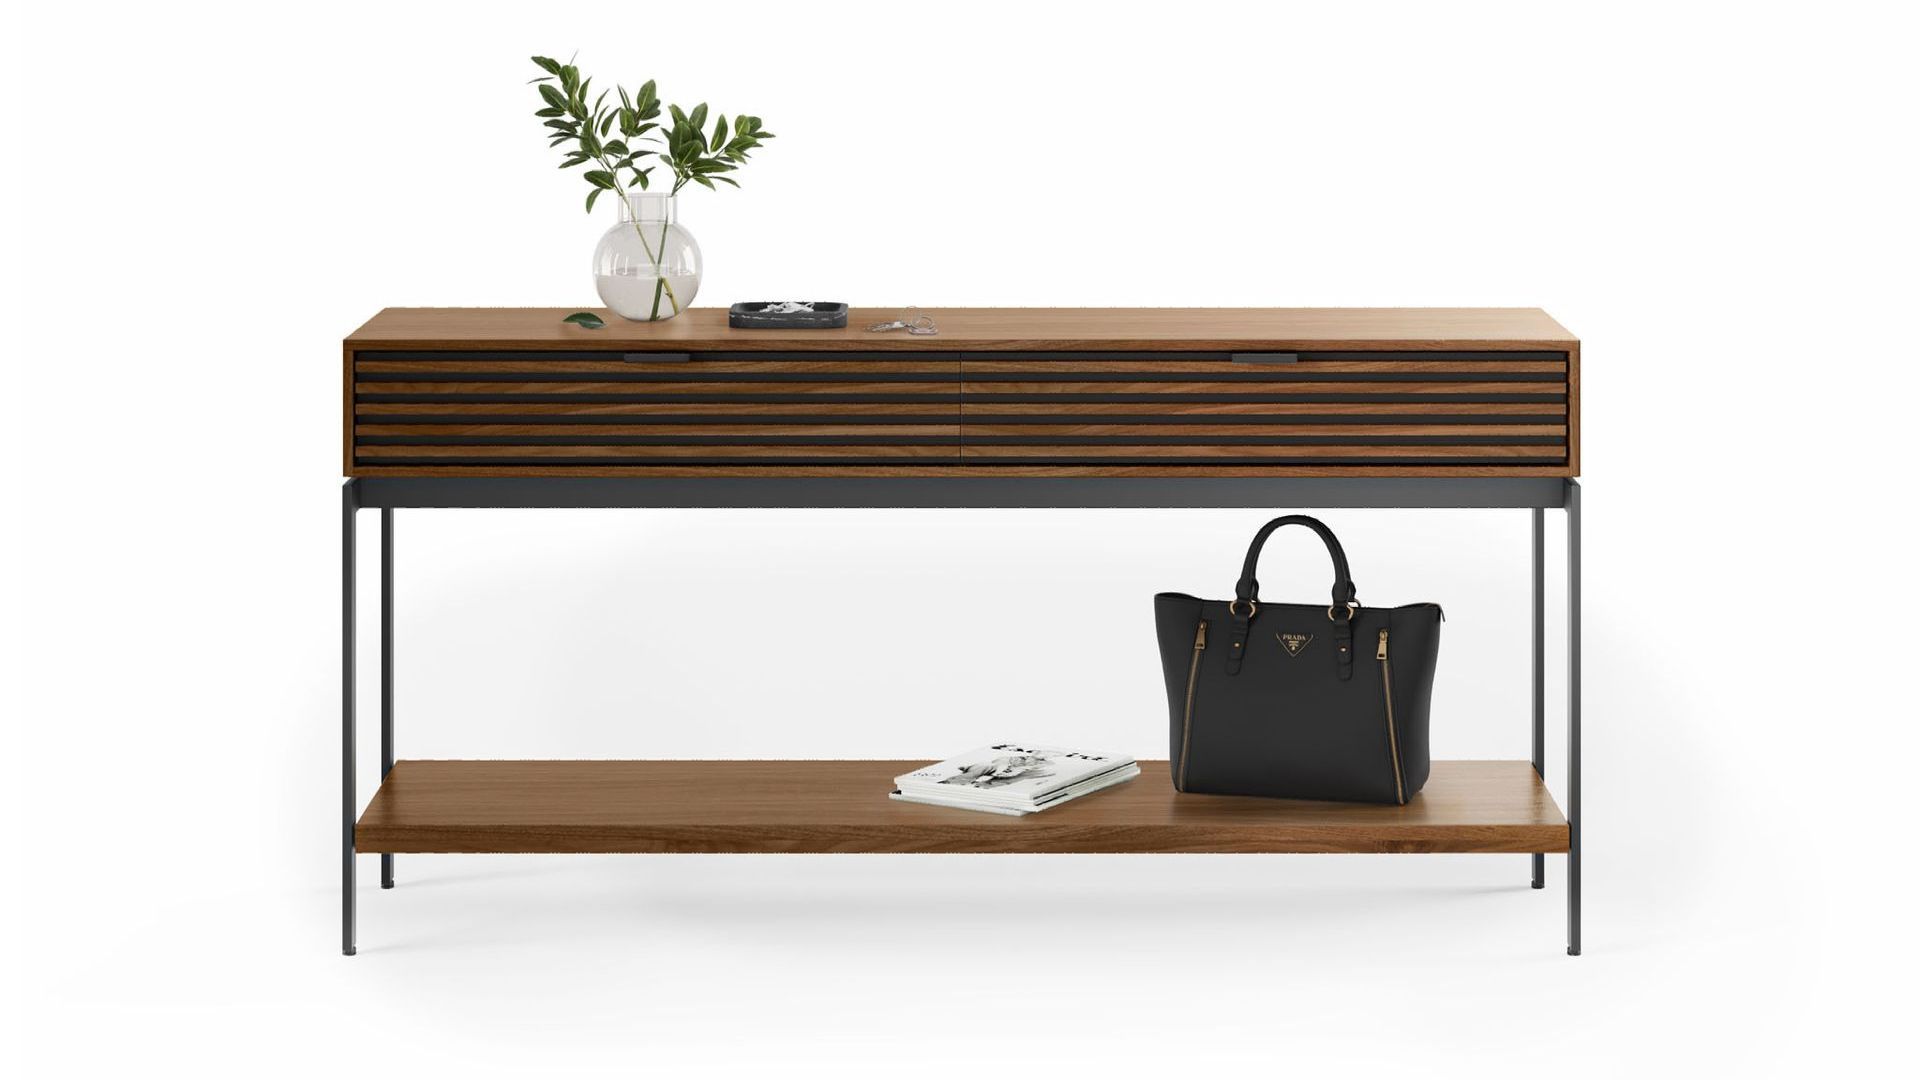 cora-1173-wood-console-table